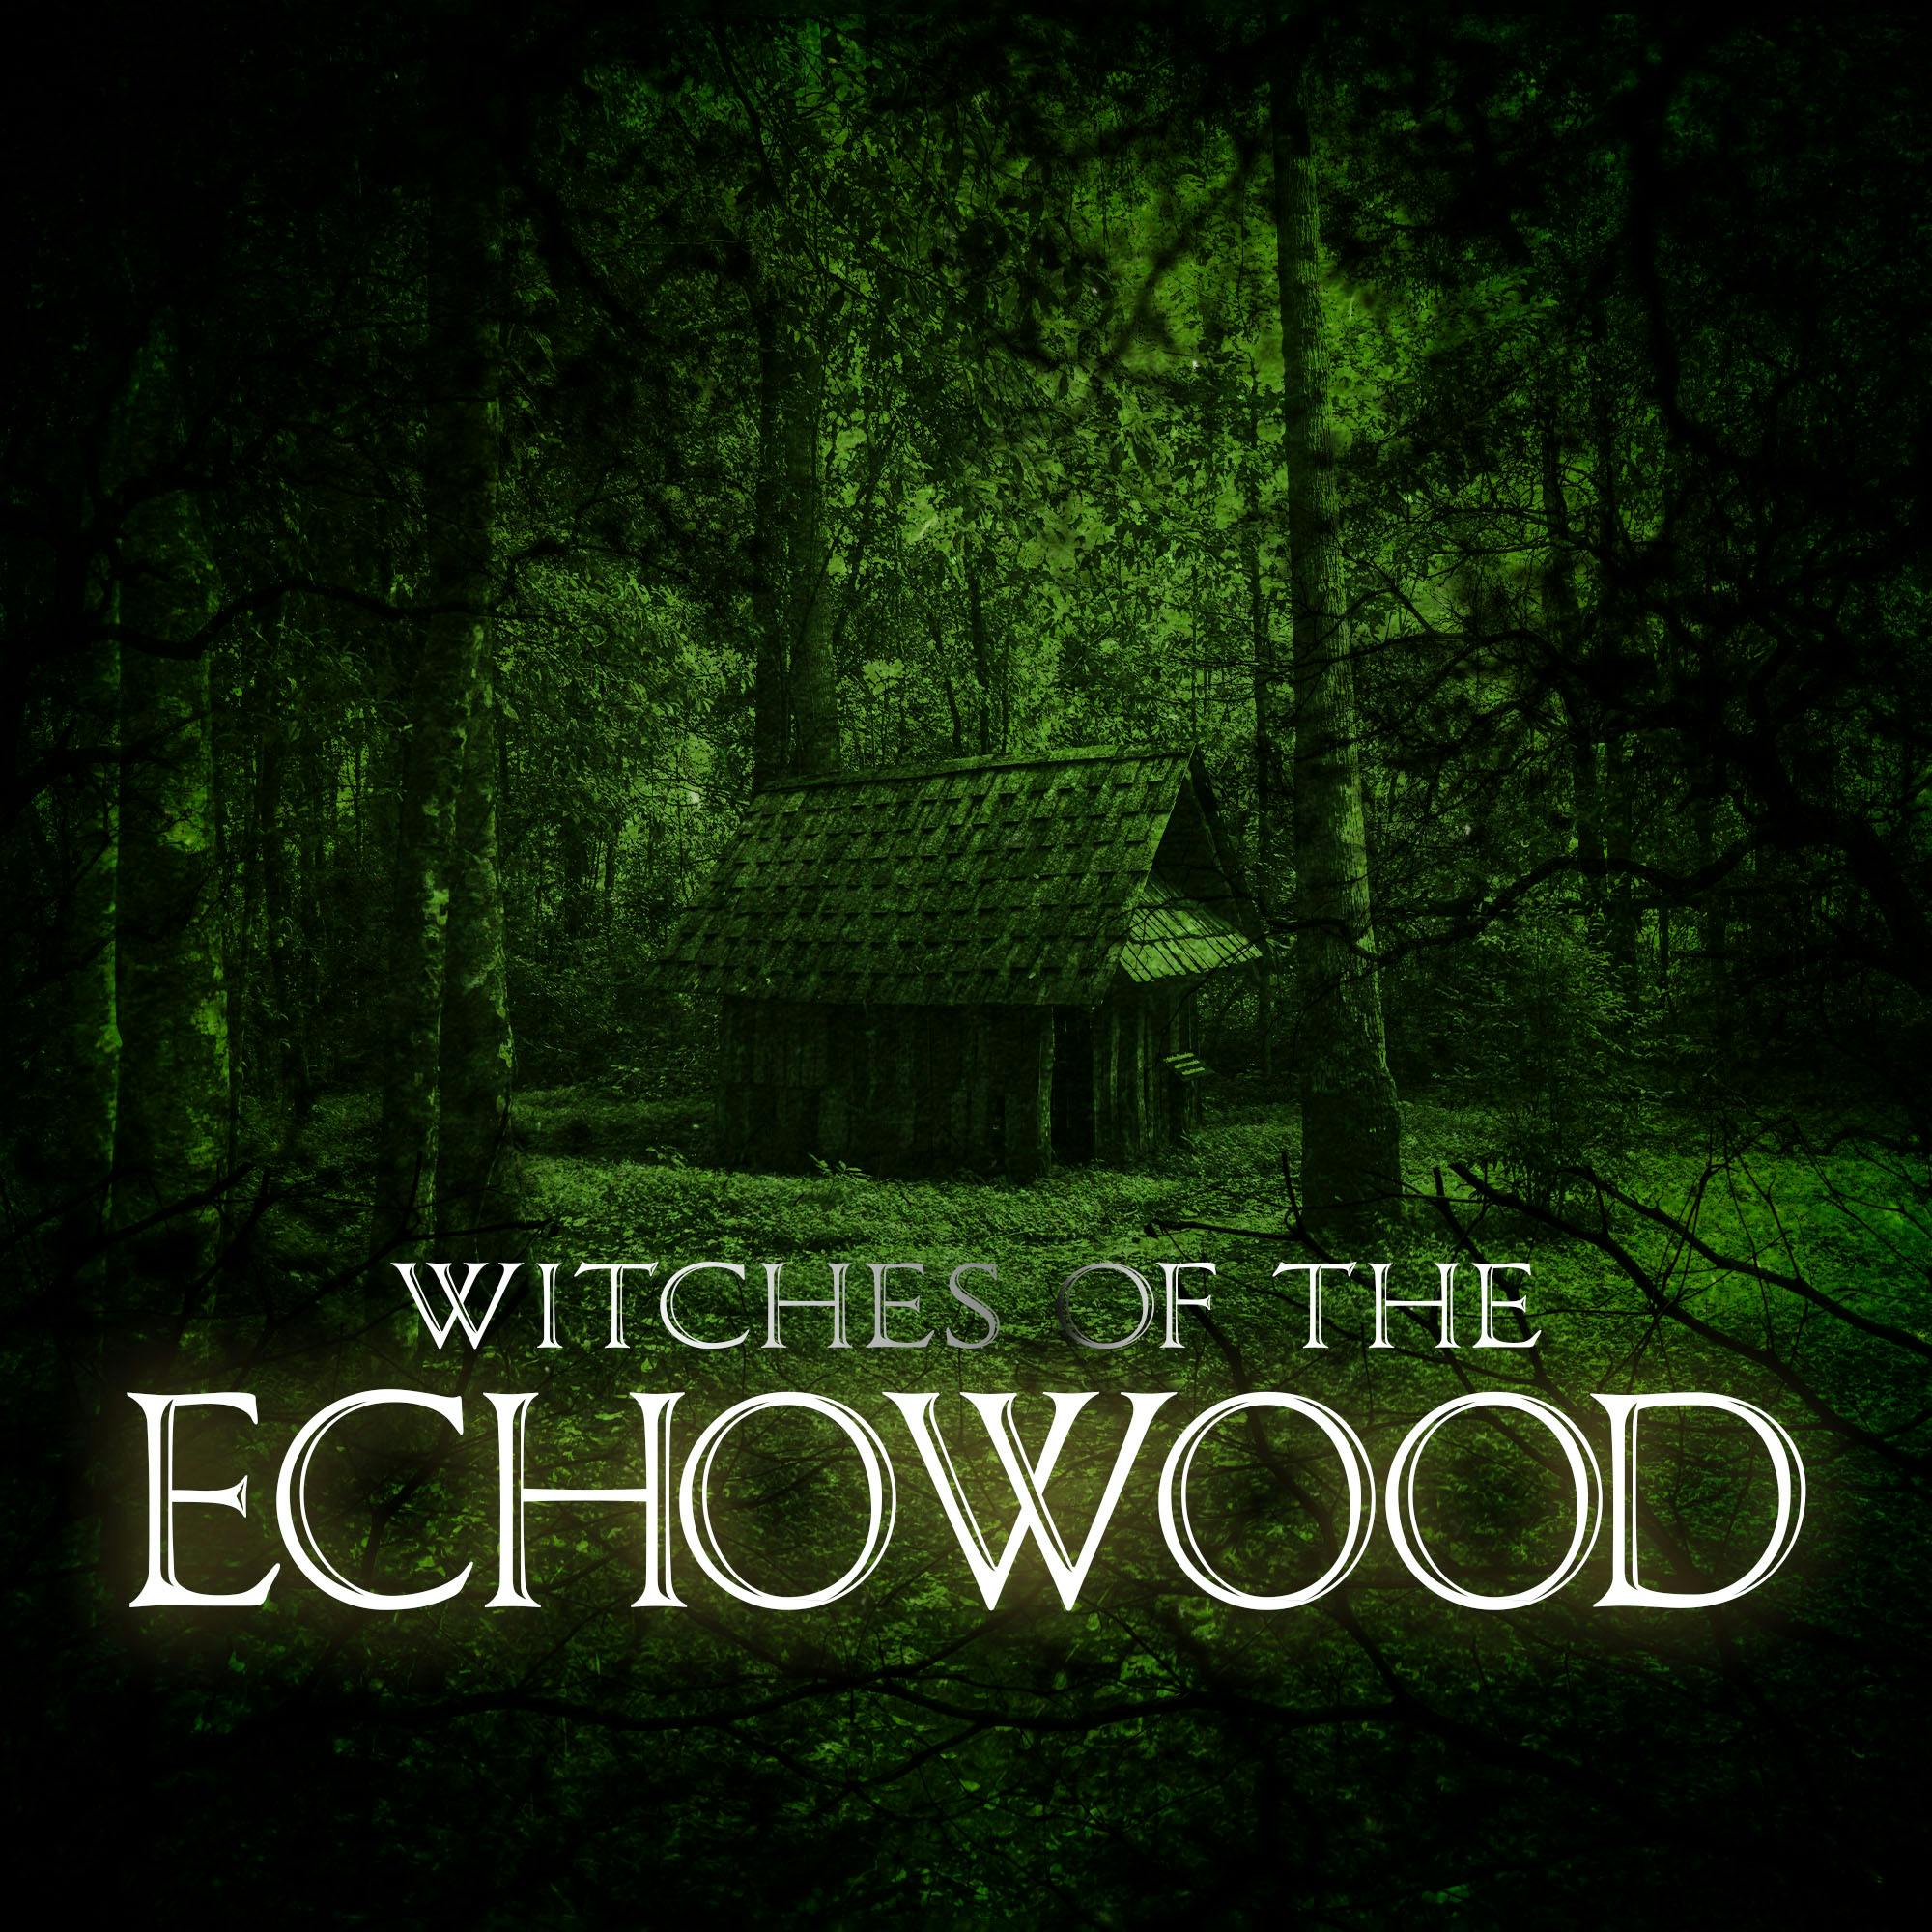 Tales of the Echowood Feed Swap: ”Witches of the Echowood”